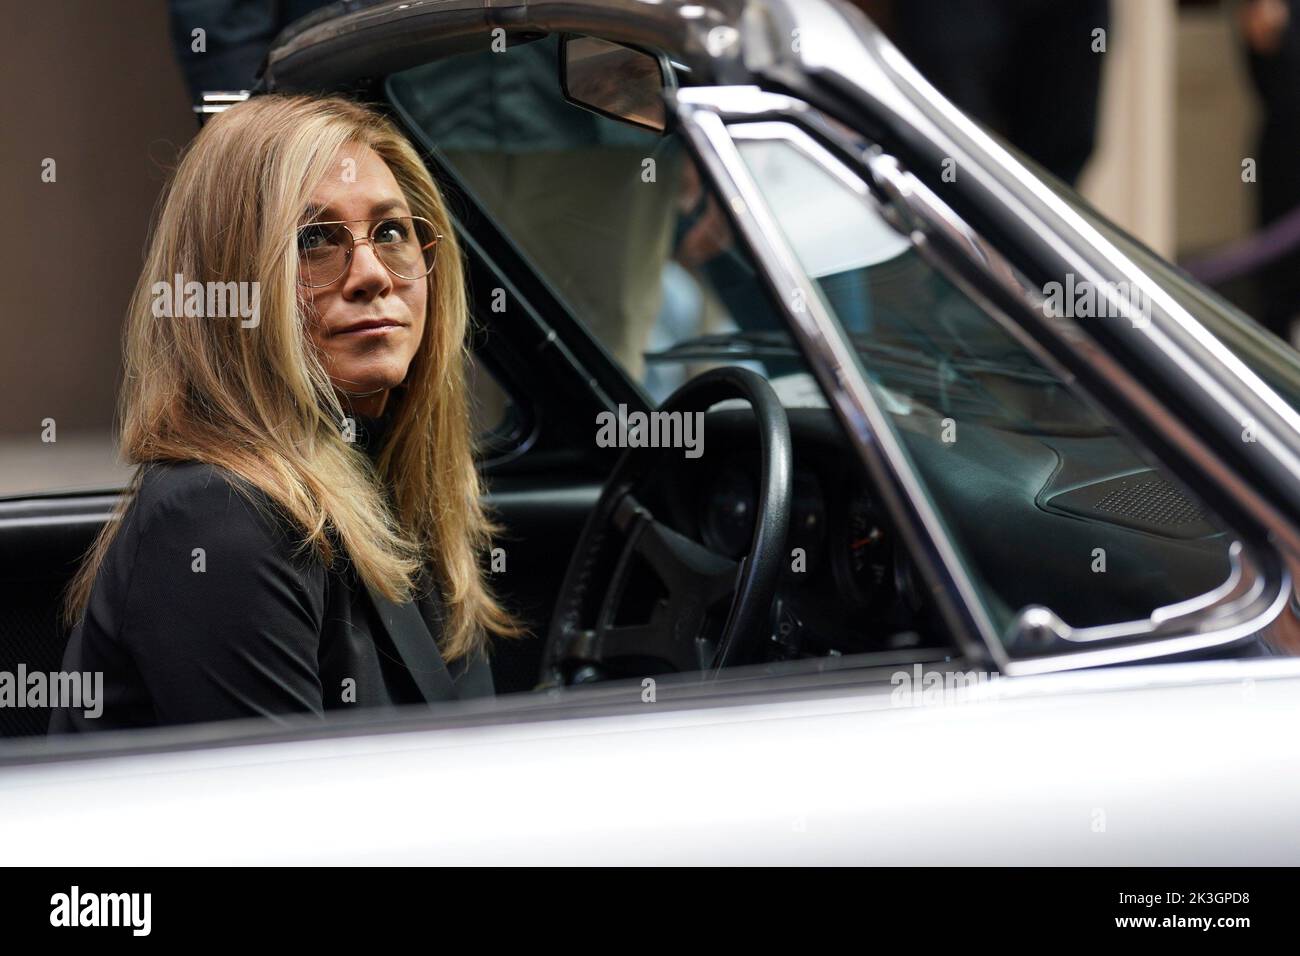 New York, NY, USA. 26th Sep, 2022. Jennifer Aniston on location for THE MORNING SHOW Shooting in NYC, Soho neighborhood in Manhattan, New York, NY September 26, 2022. Credit: Kristin Callahan/Everett Collection/Alamy Live News Stock Photo